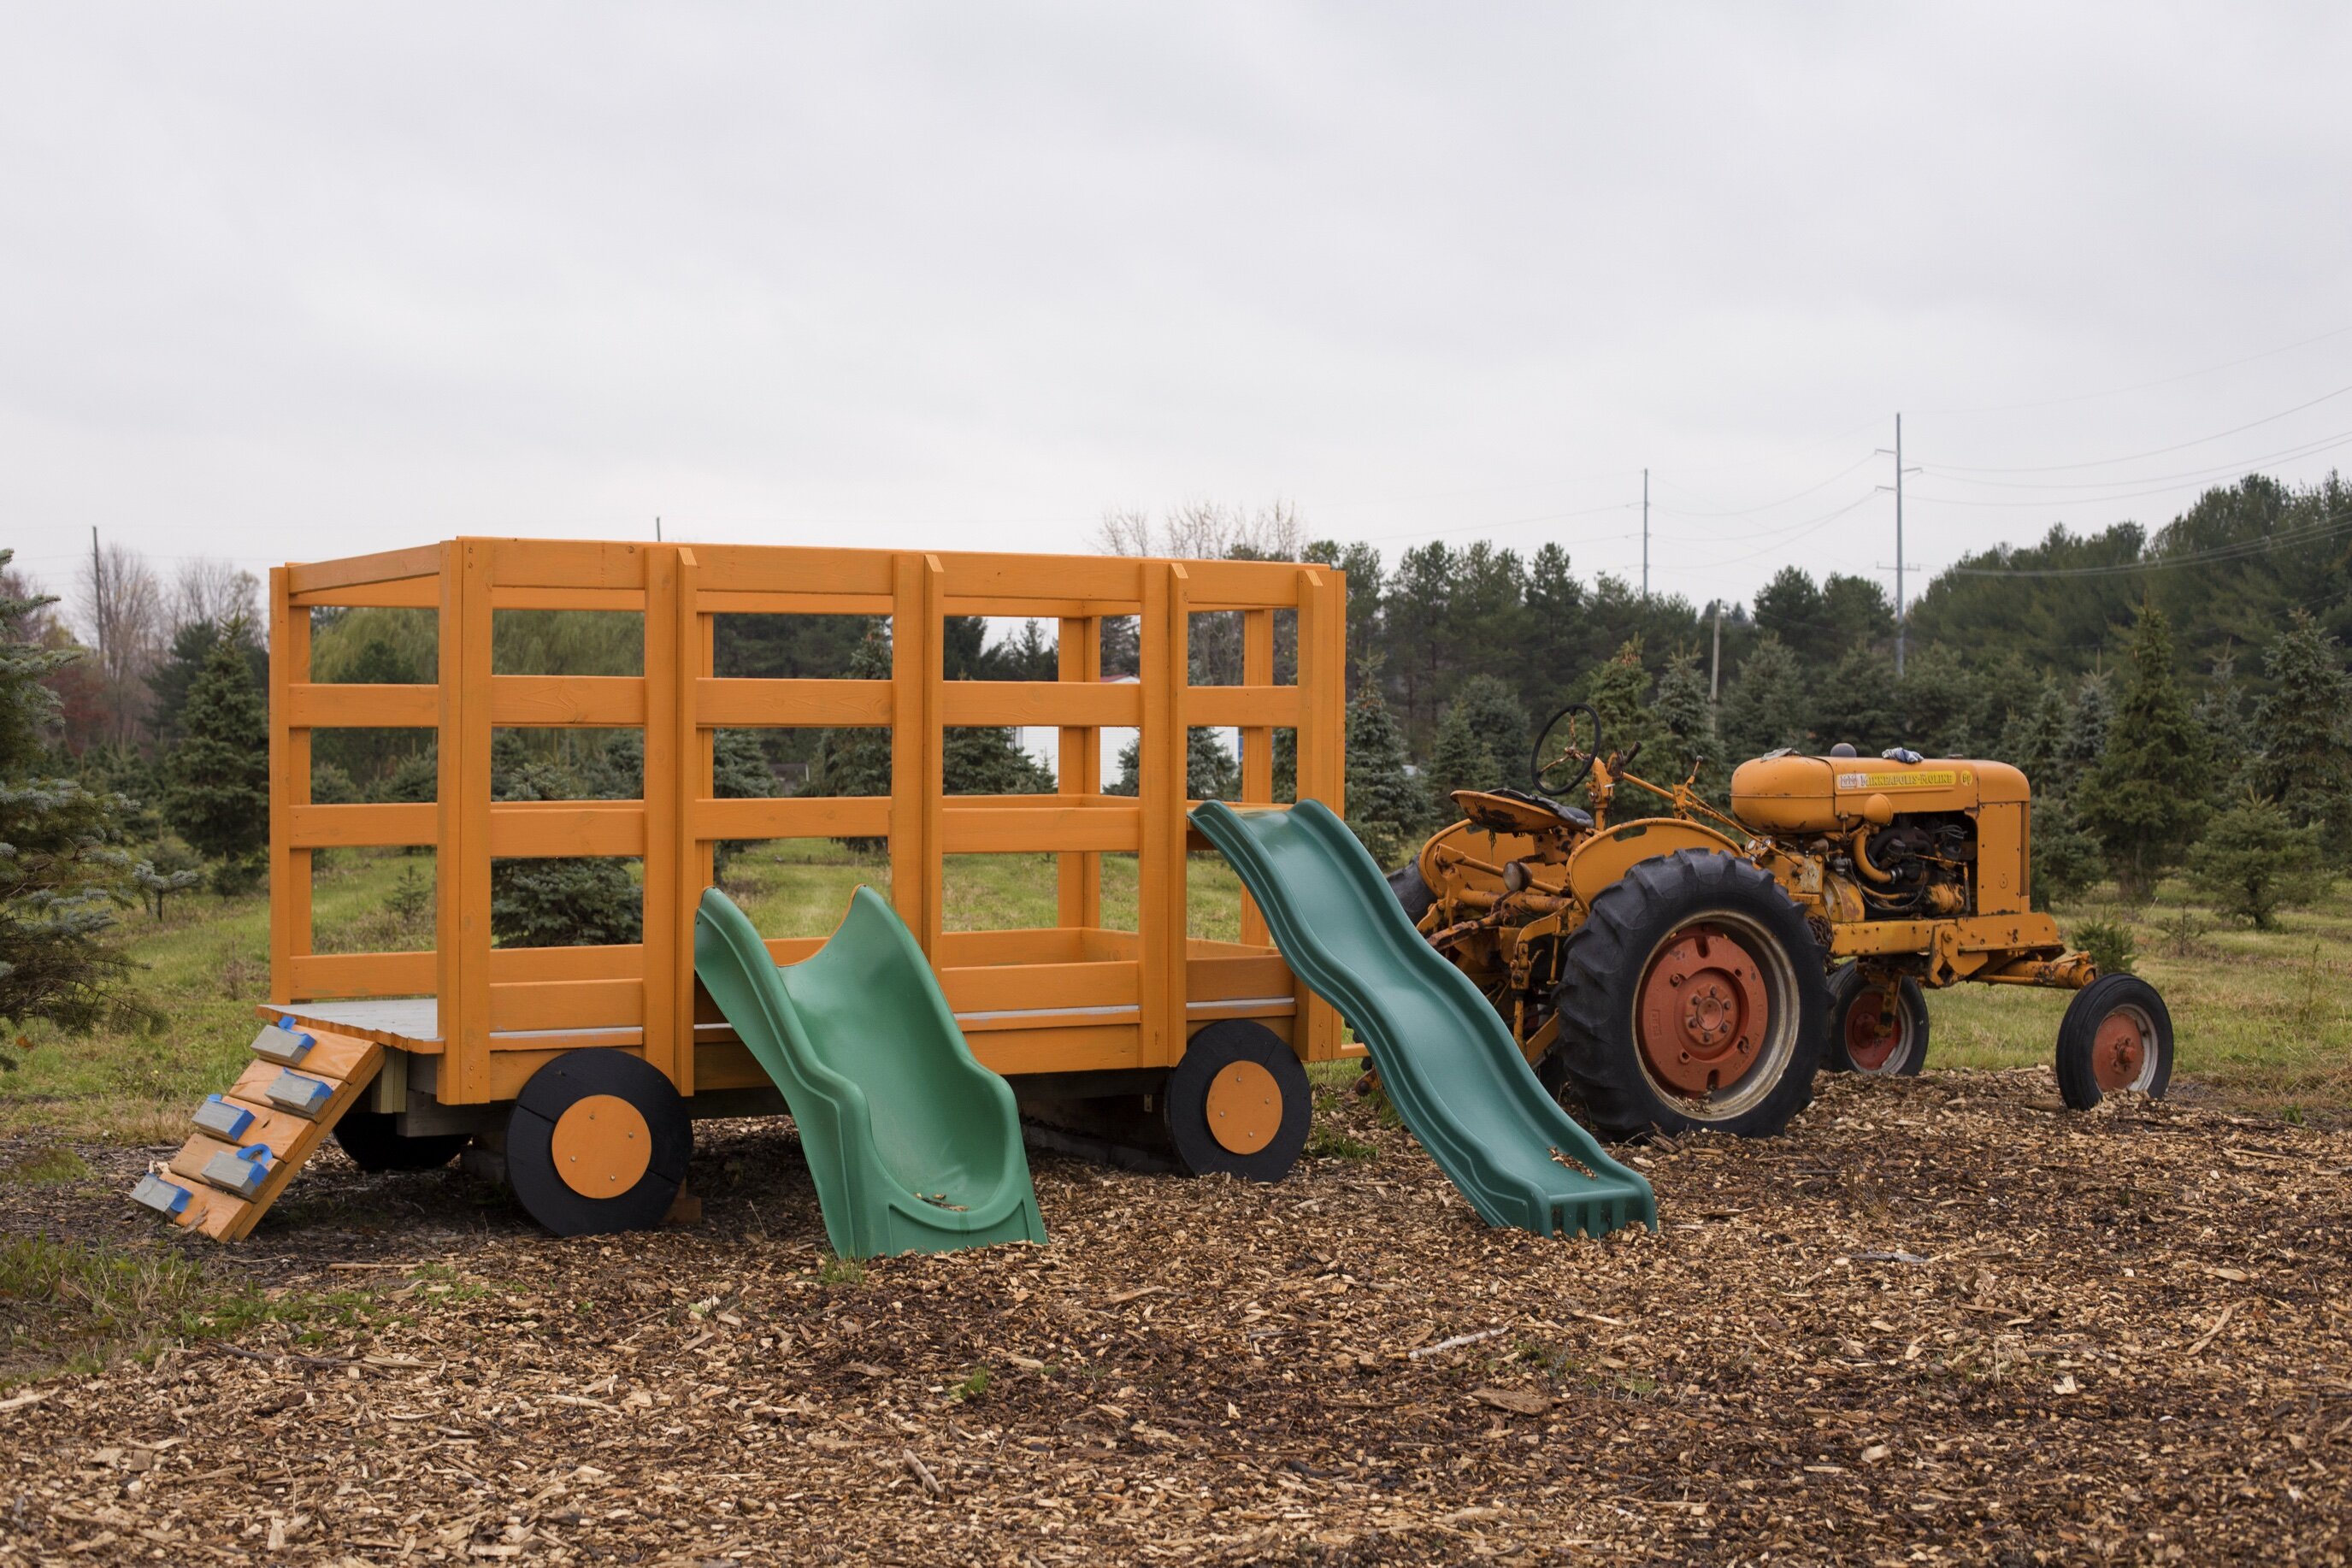 A 1956 Minneapolis Moline tractor owned by Ron Shephard, Country Christmas Tree Farm owner Ed Shephard's father, has been repurposed into a playscape for children to enjoy at the property.